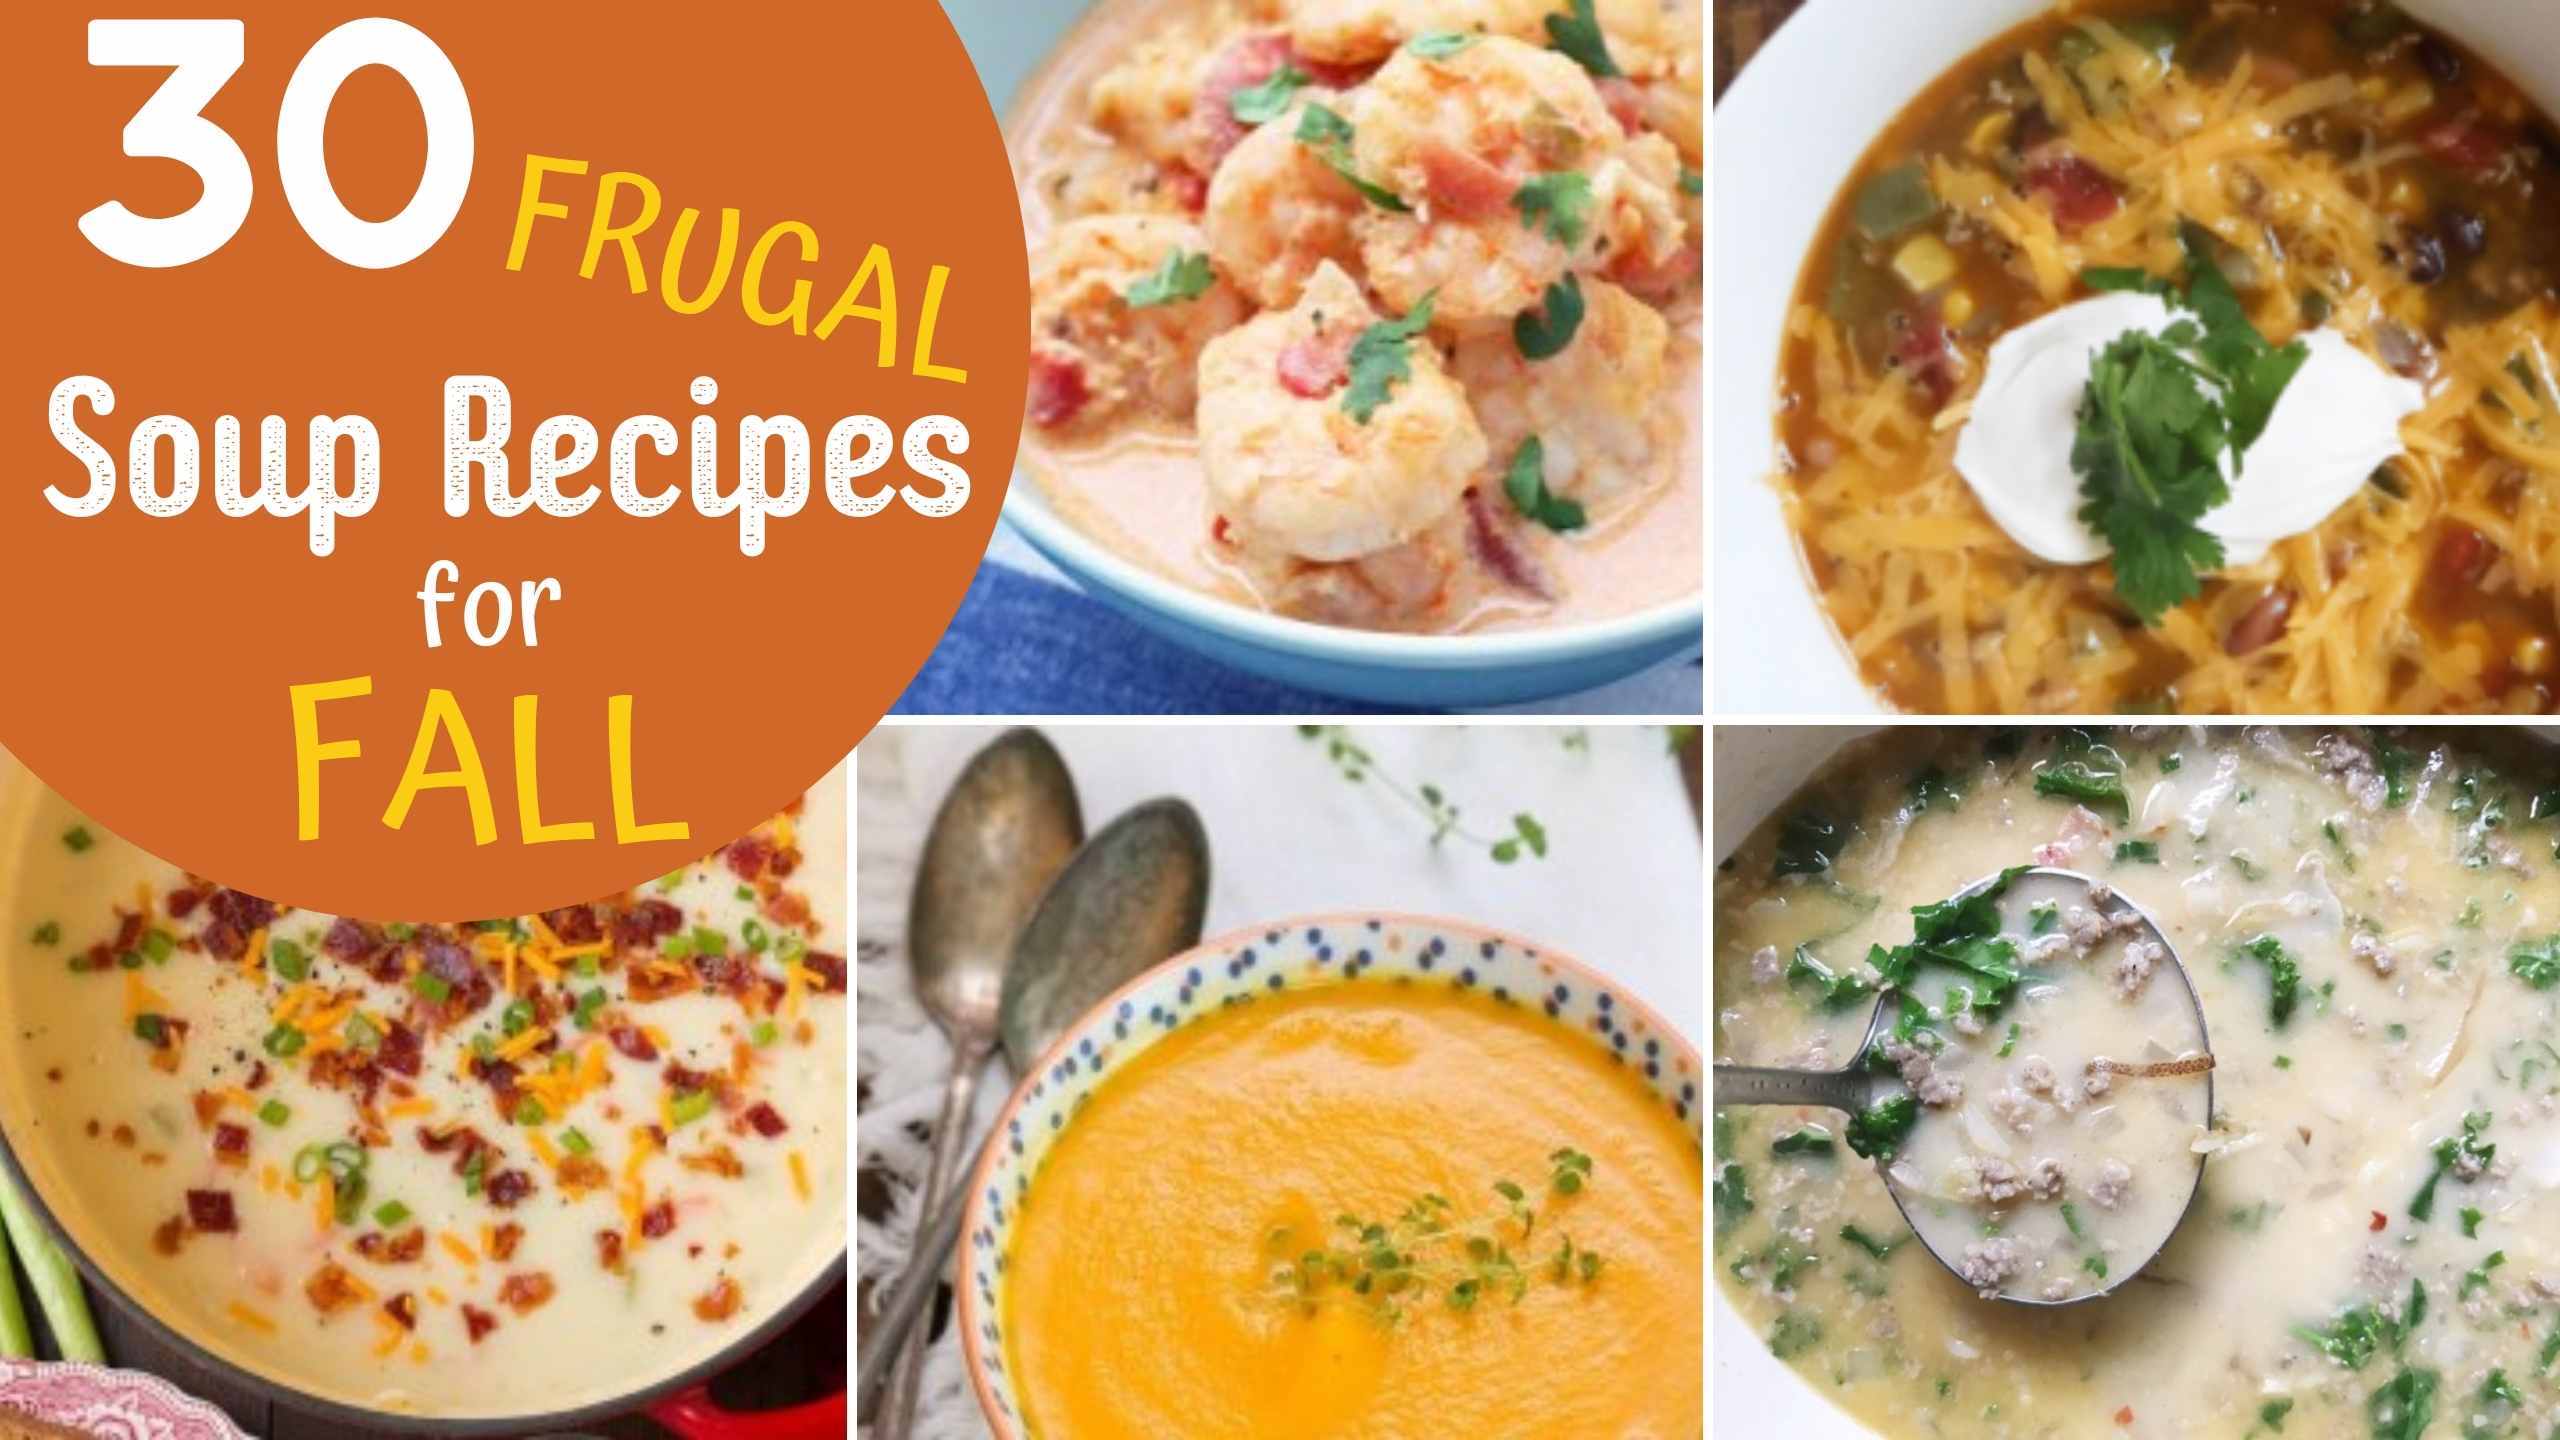 30 Frugal Soup Recipes for Fall